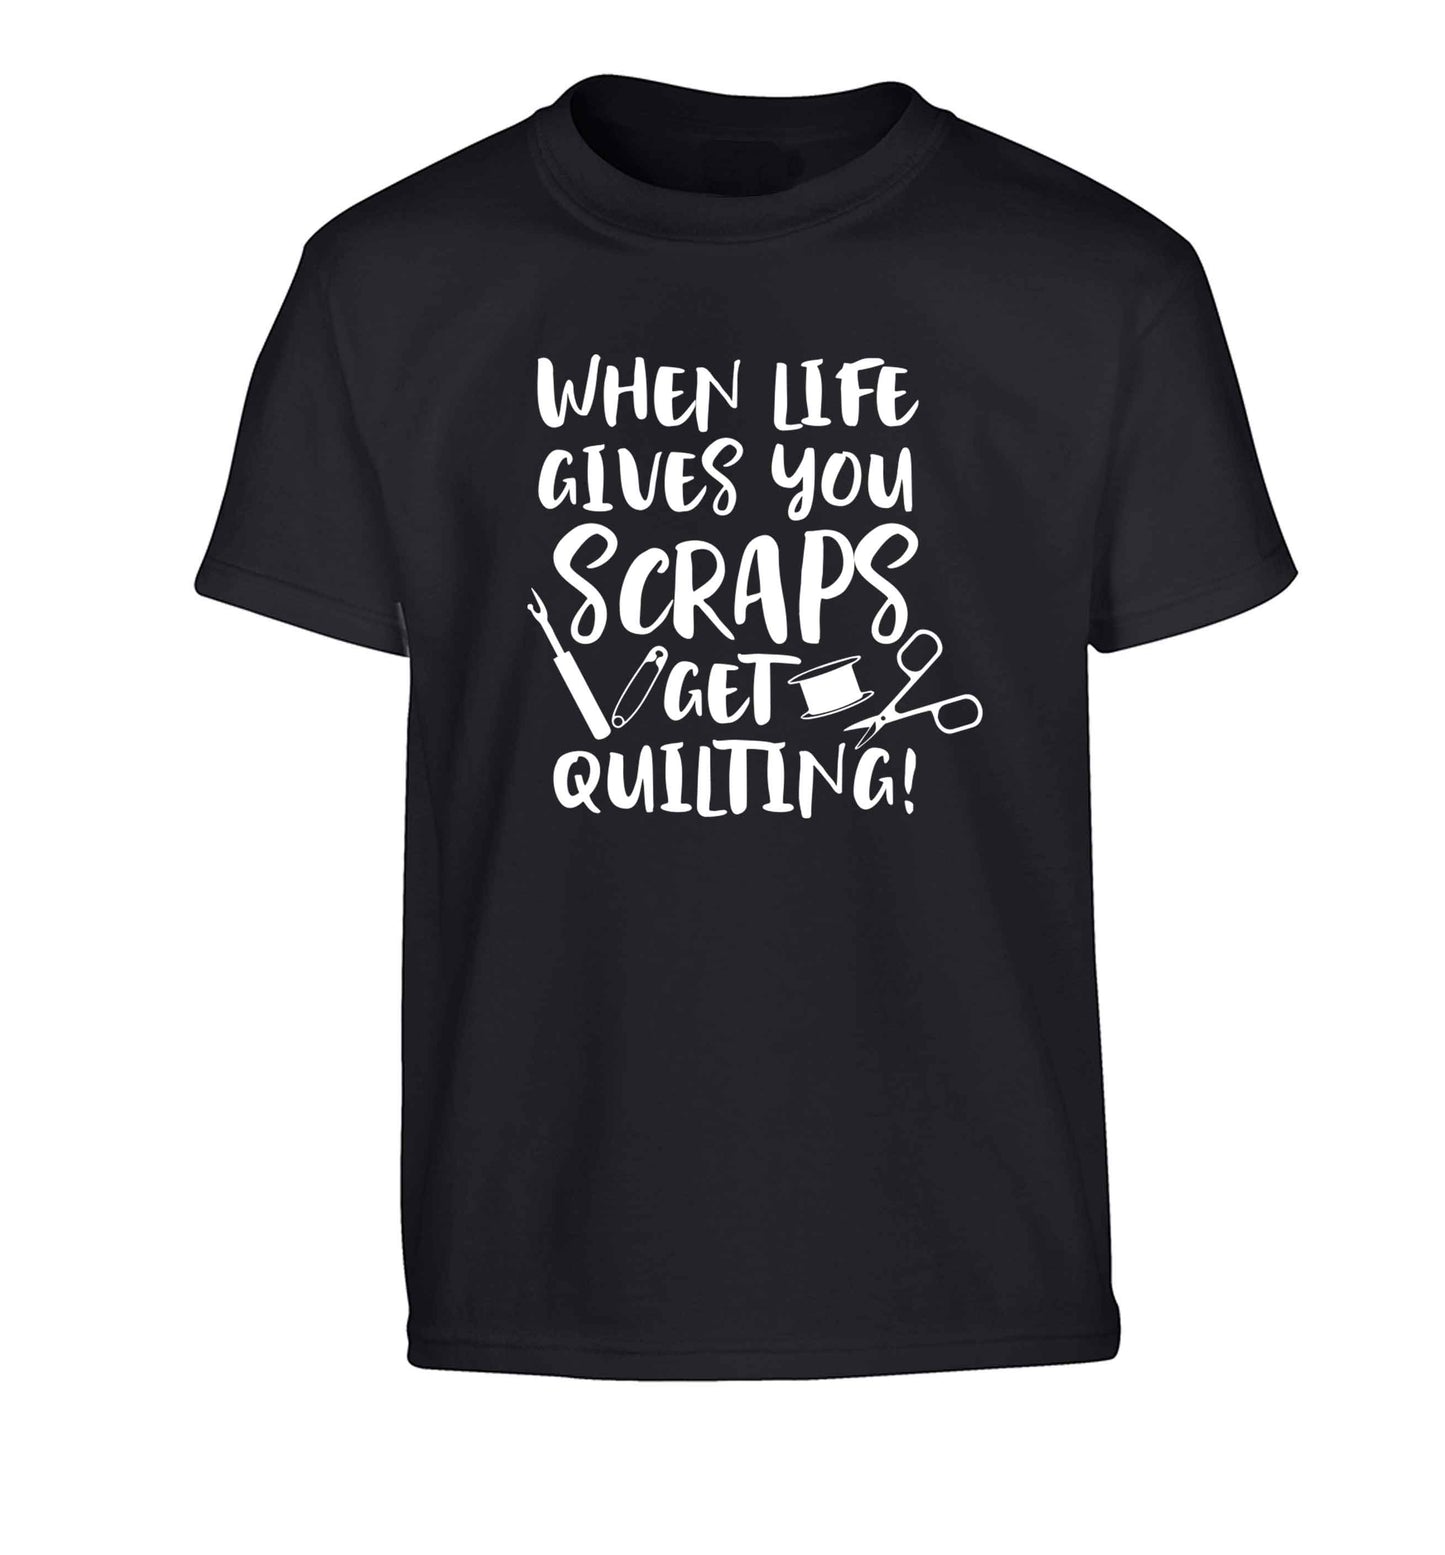 When life gives you scraps get quilting! Children's black Tshirt 12-13 Years